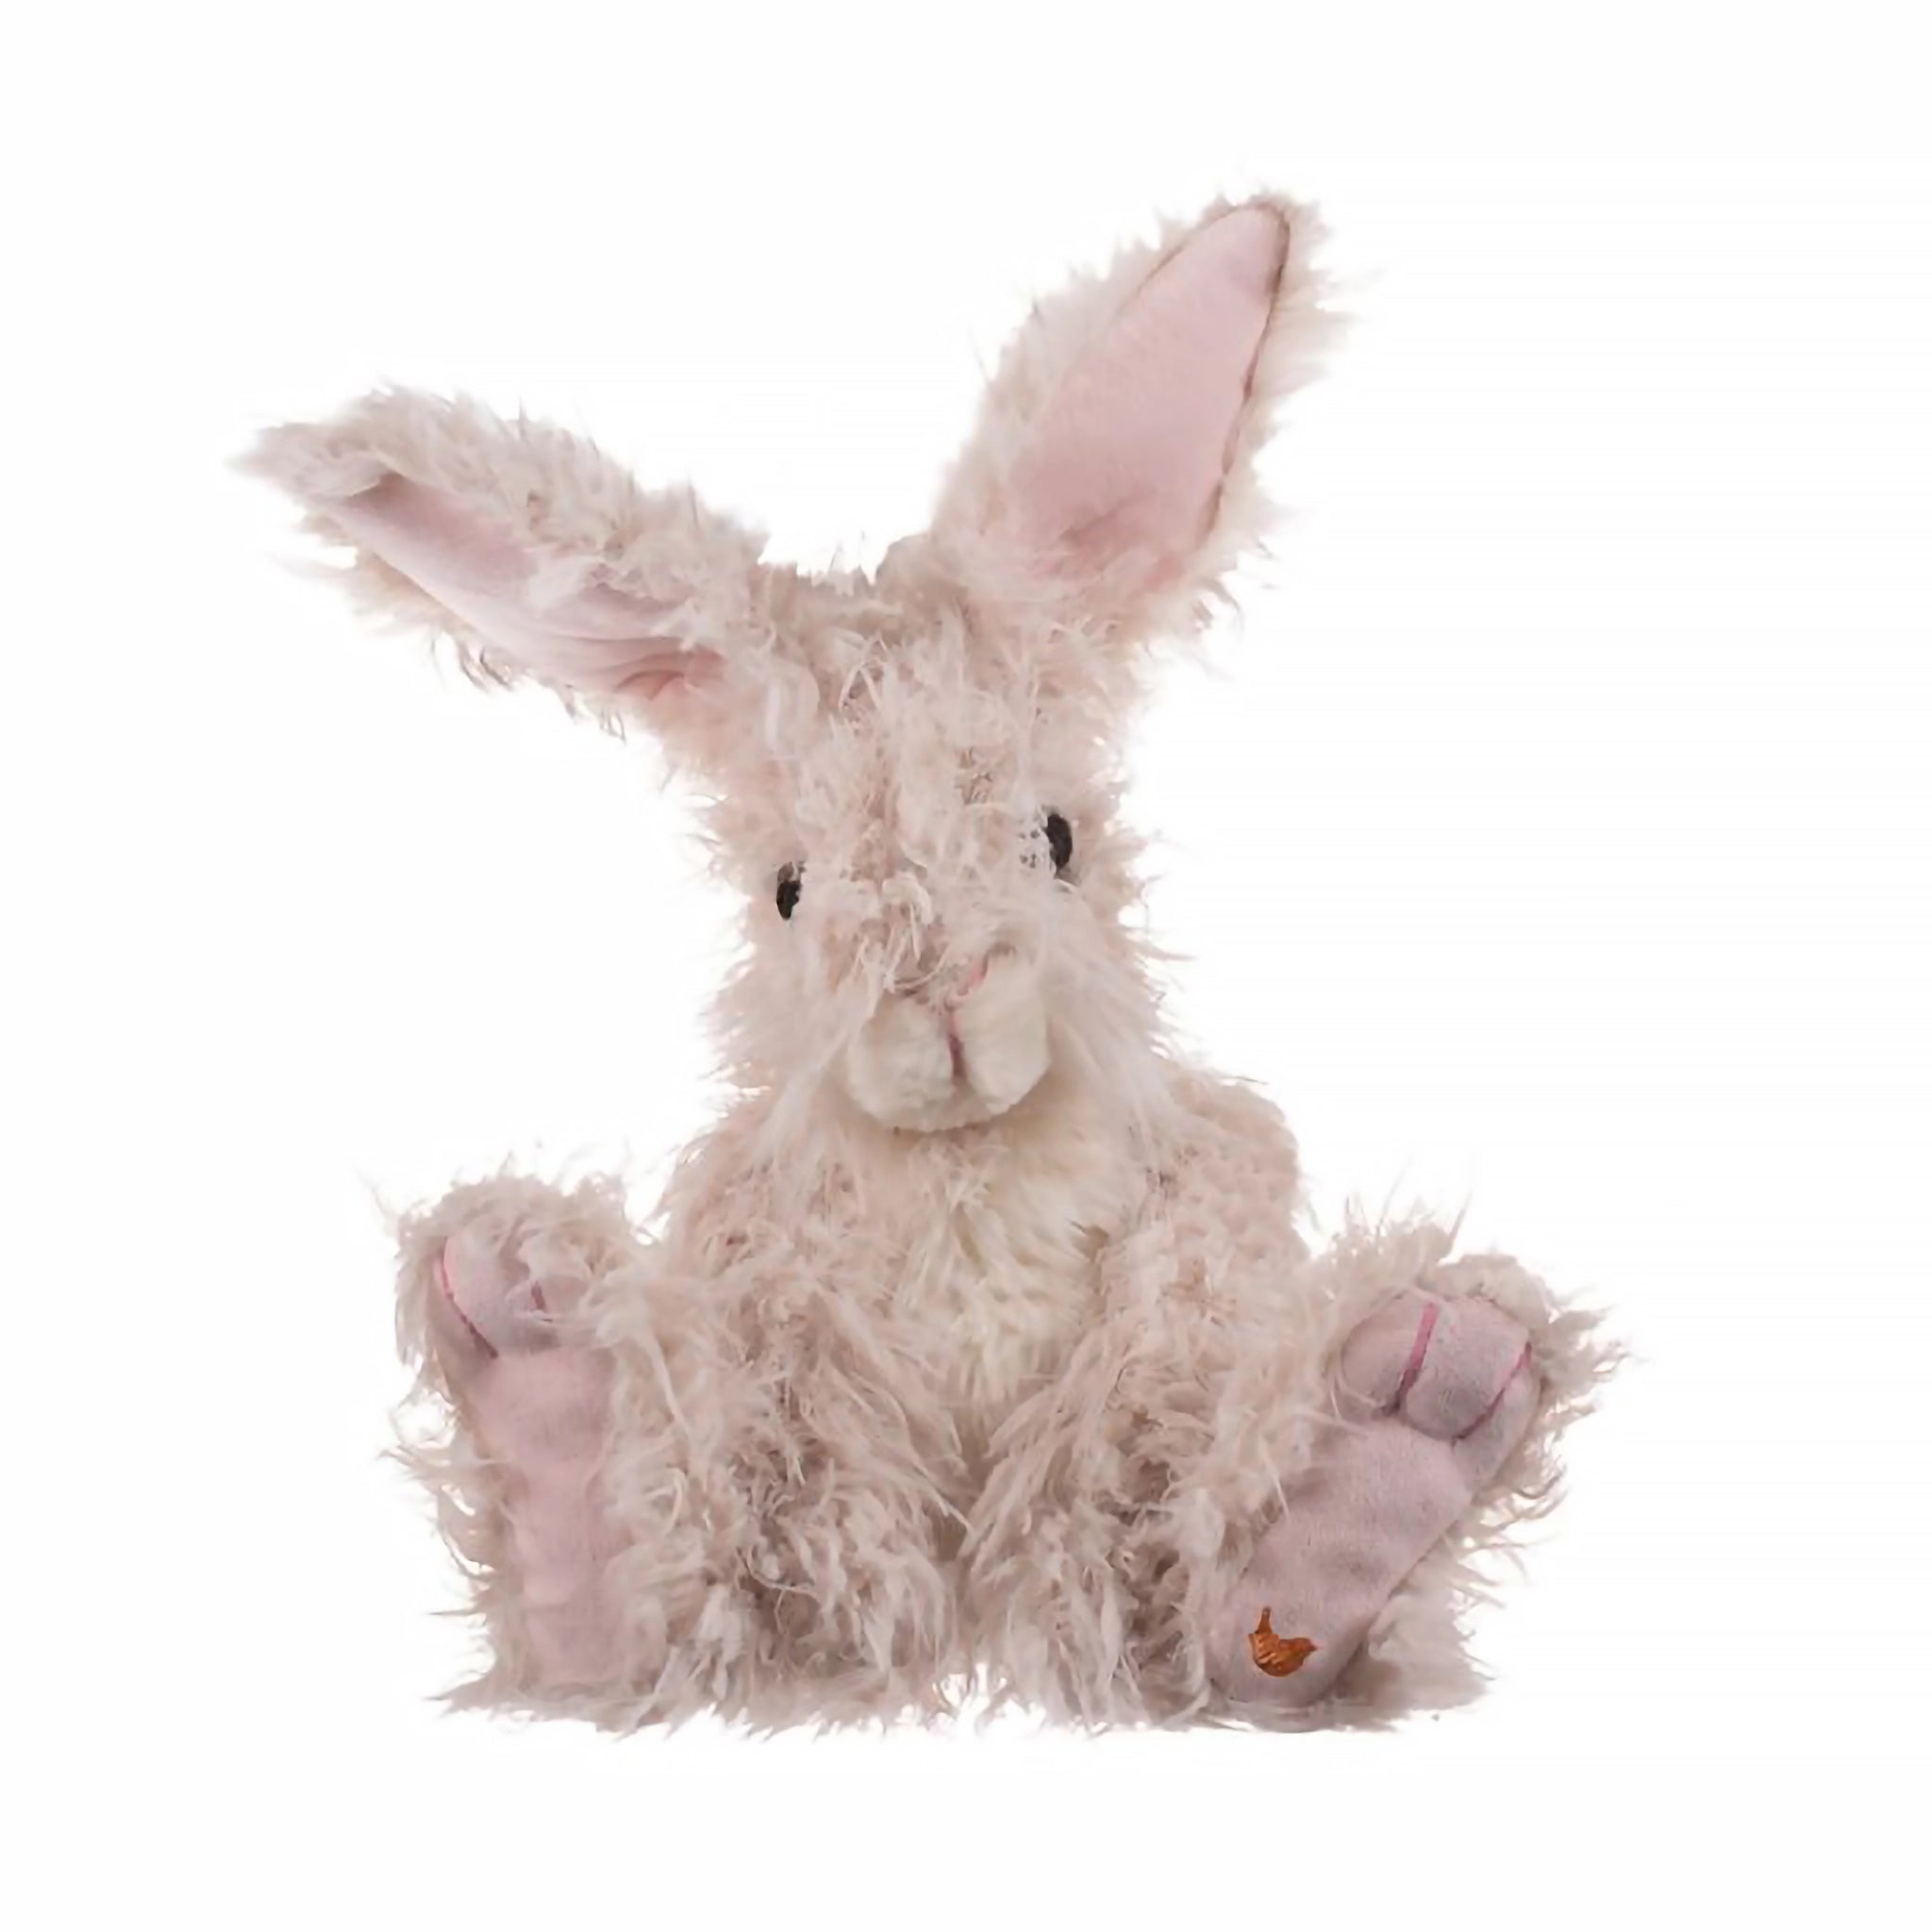 A stuffed hare plush toy with the Wrendale logo embroidered on the bottom of its foot